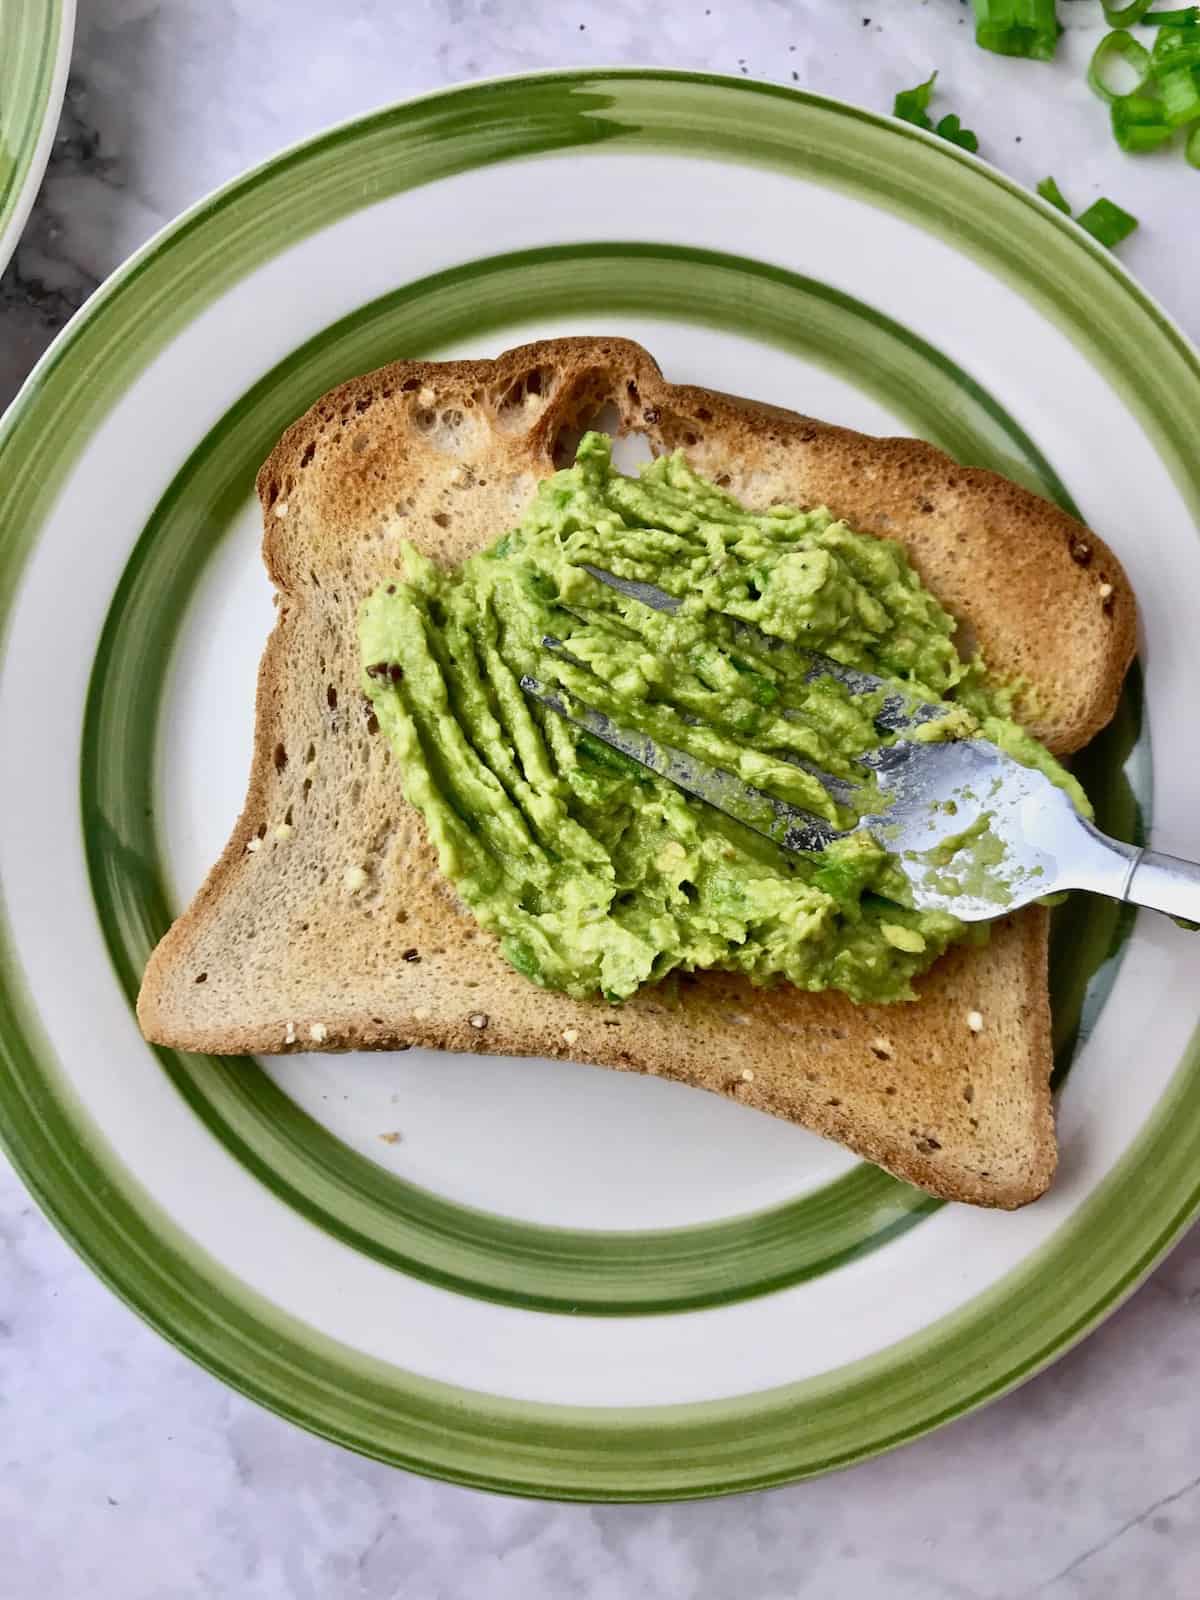 Avocado mix being spread on a piece of toast with a fork.